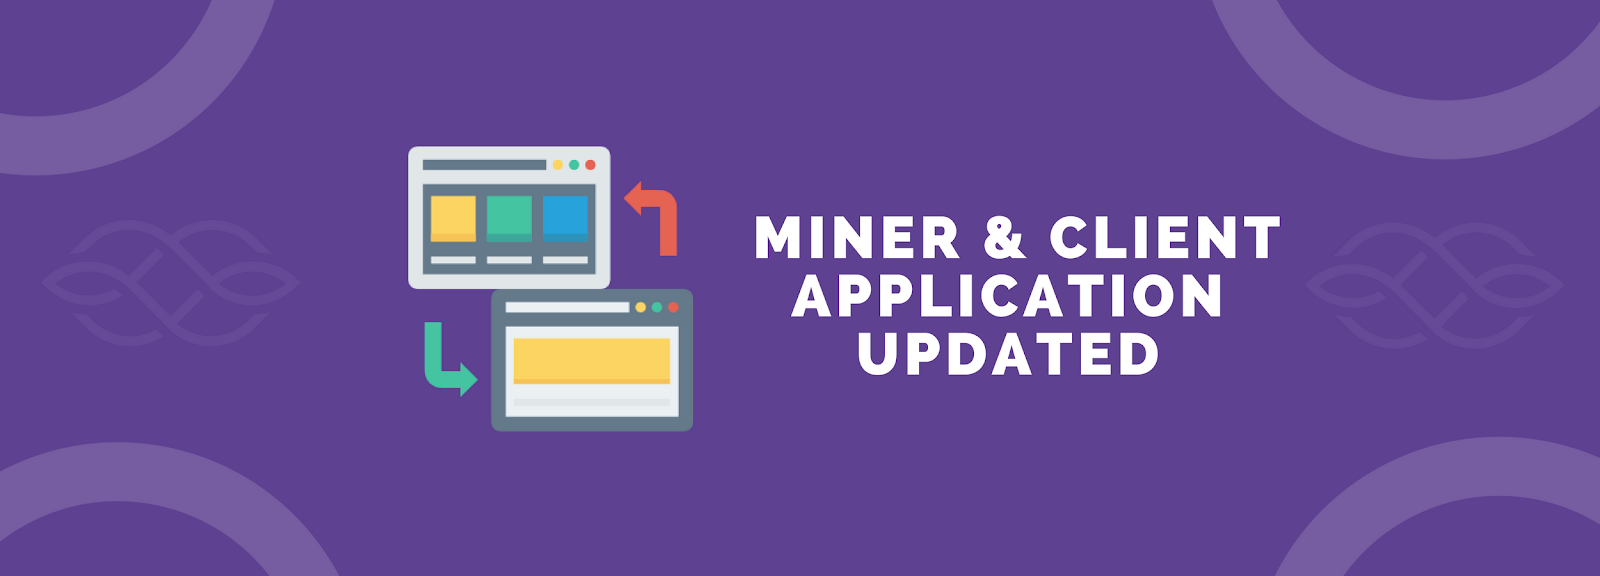 Have You Heard? The Updated Miner and Client App Is OUT!